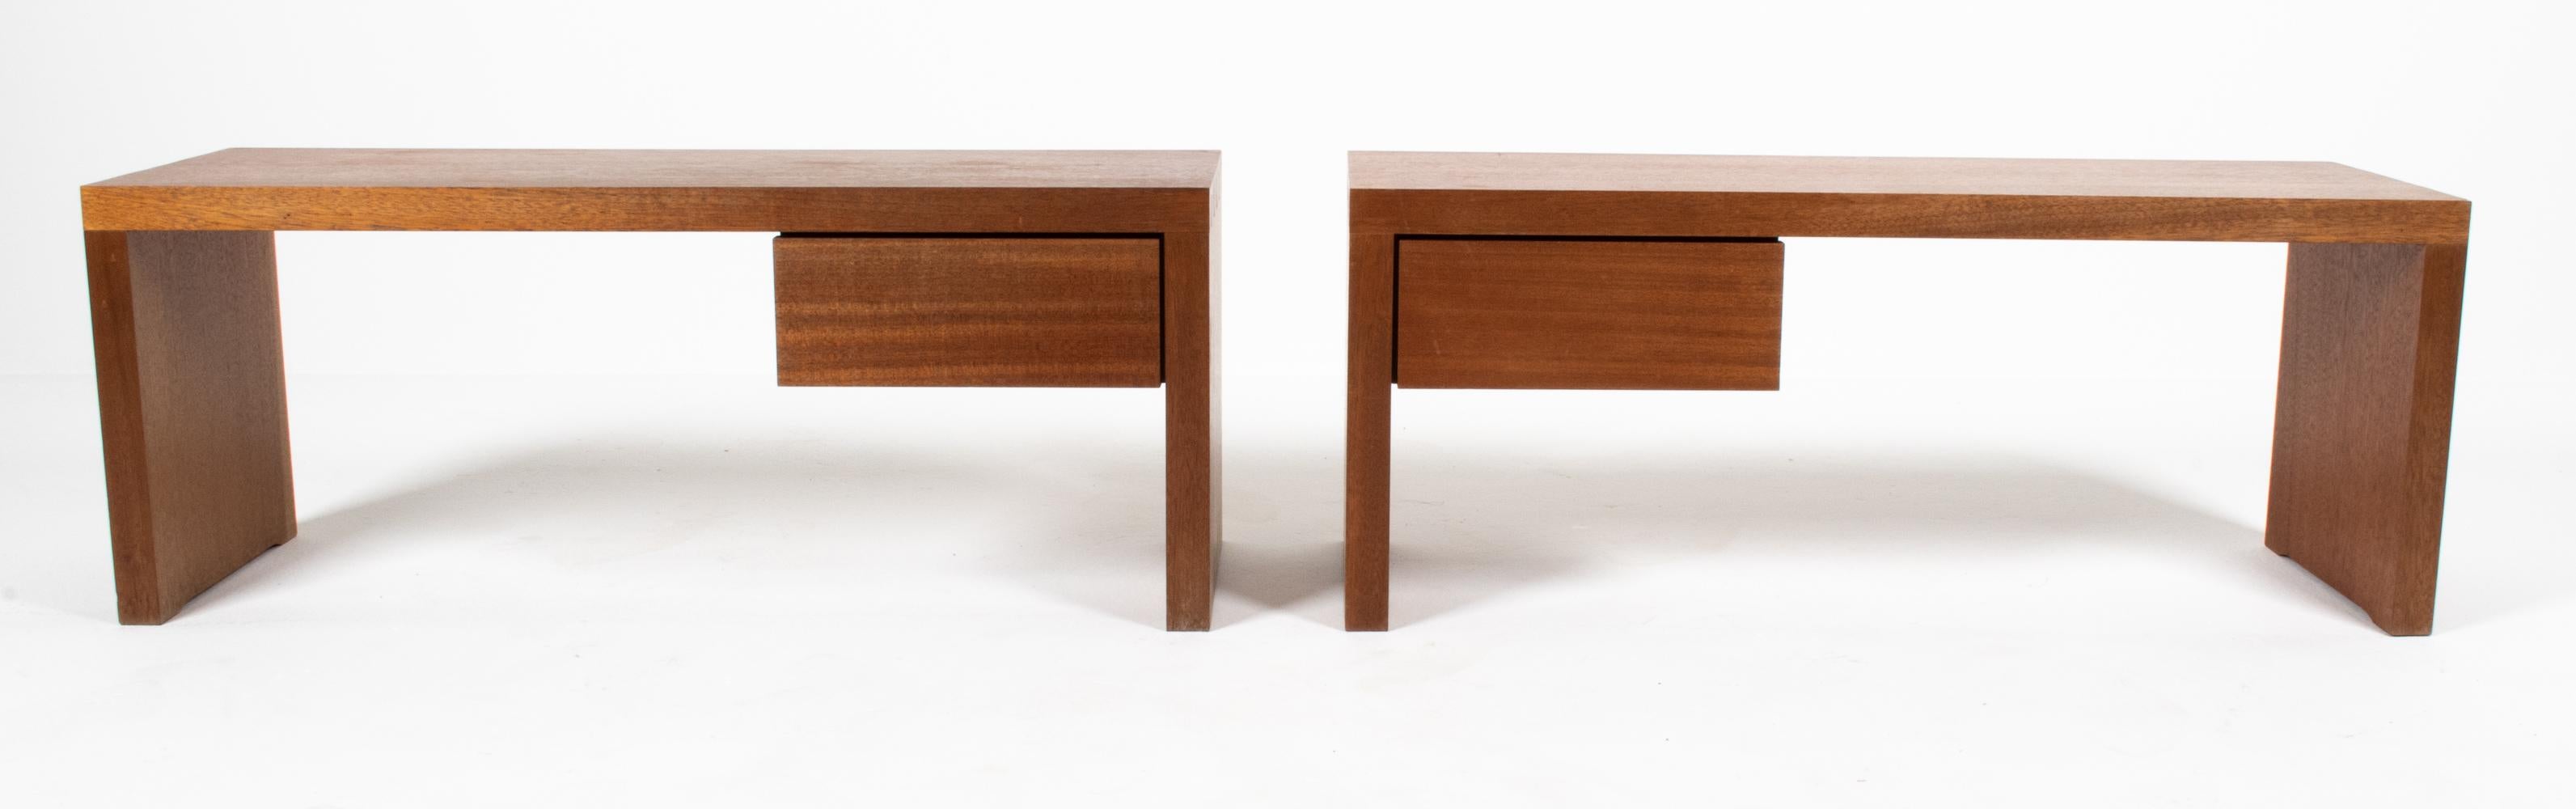 Pair of Mid-Century Modern Dovetailed Teak Nightstands or Benches In Good Condition For Sale In Norwalk, CT